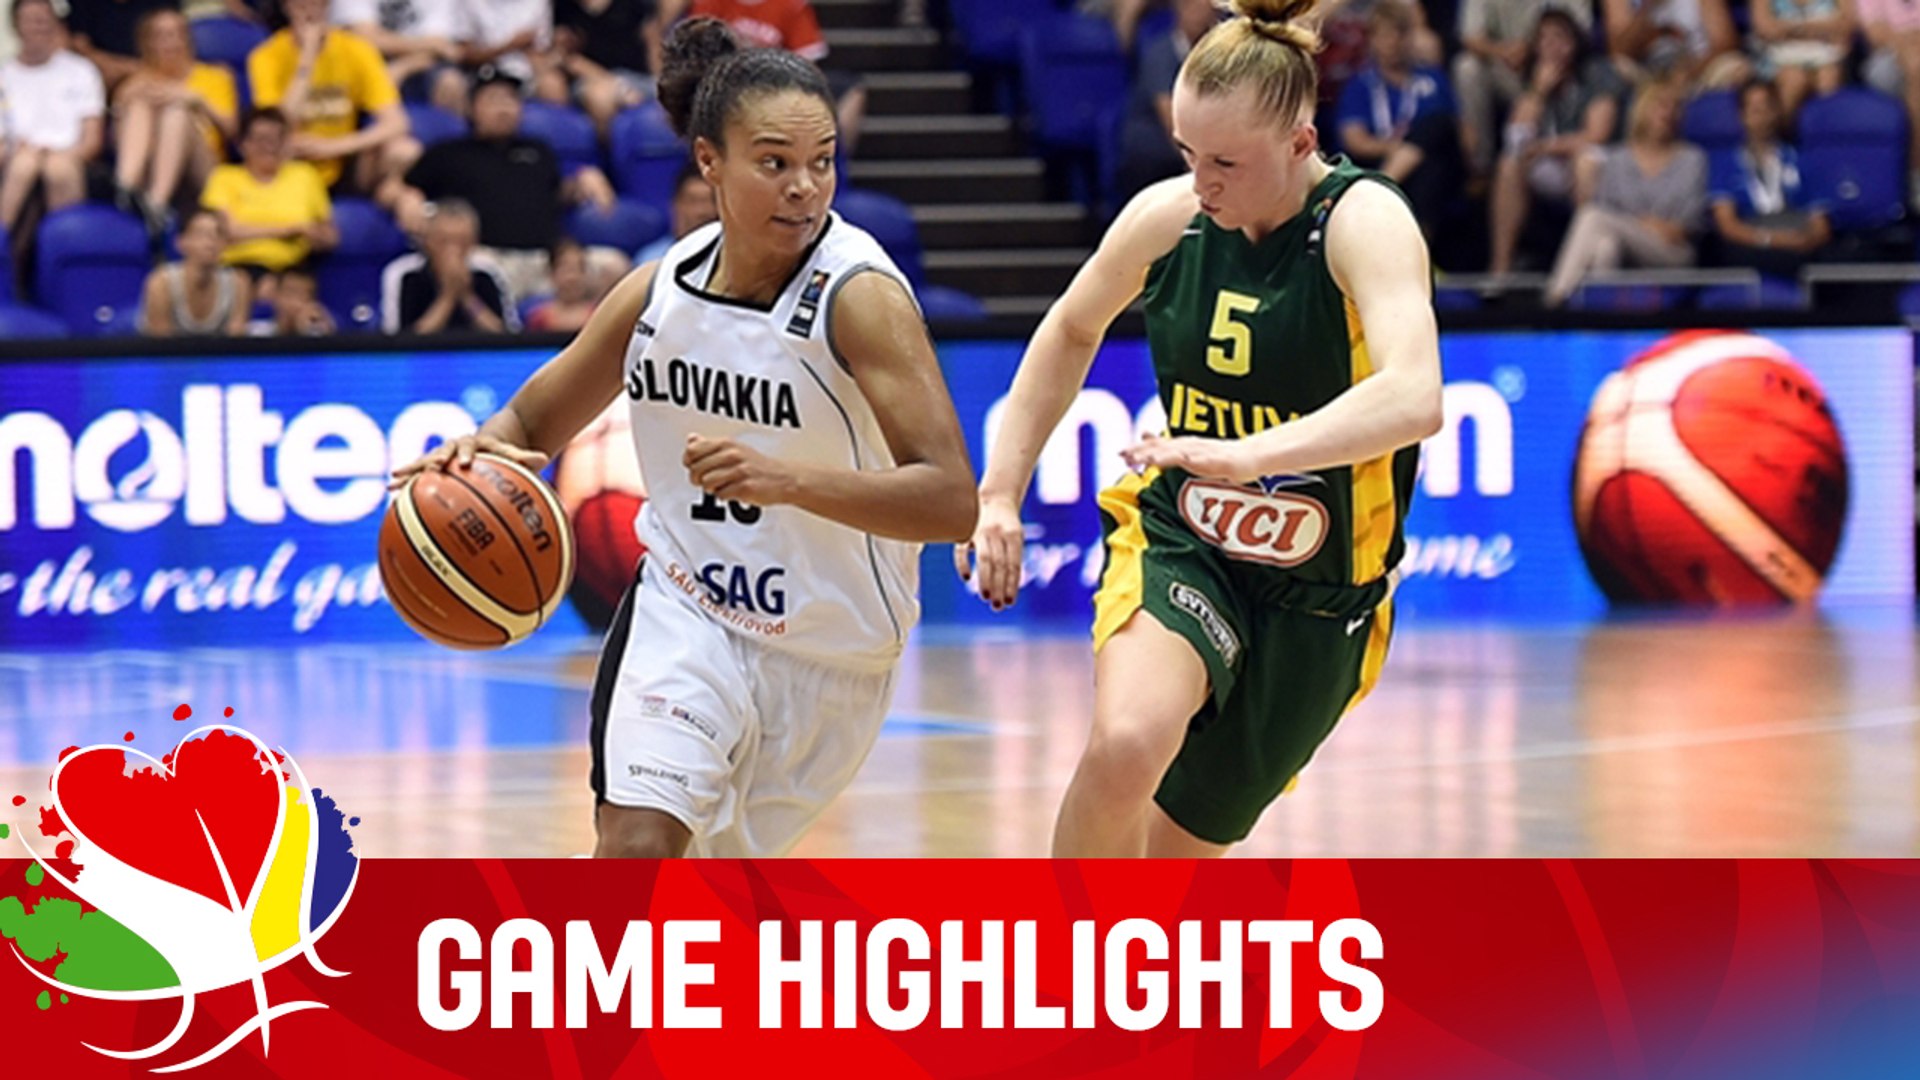 Slovakia v Lithuania - Game Highlights - Group D - EuroBasket Women 2015 -  video Dailymotion